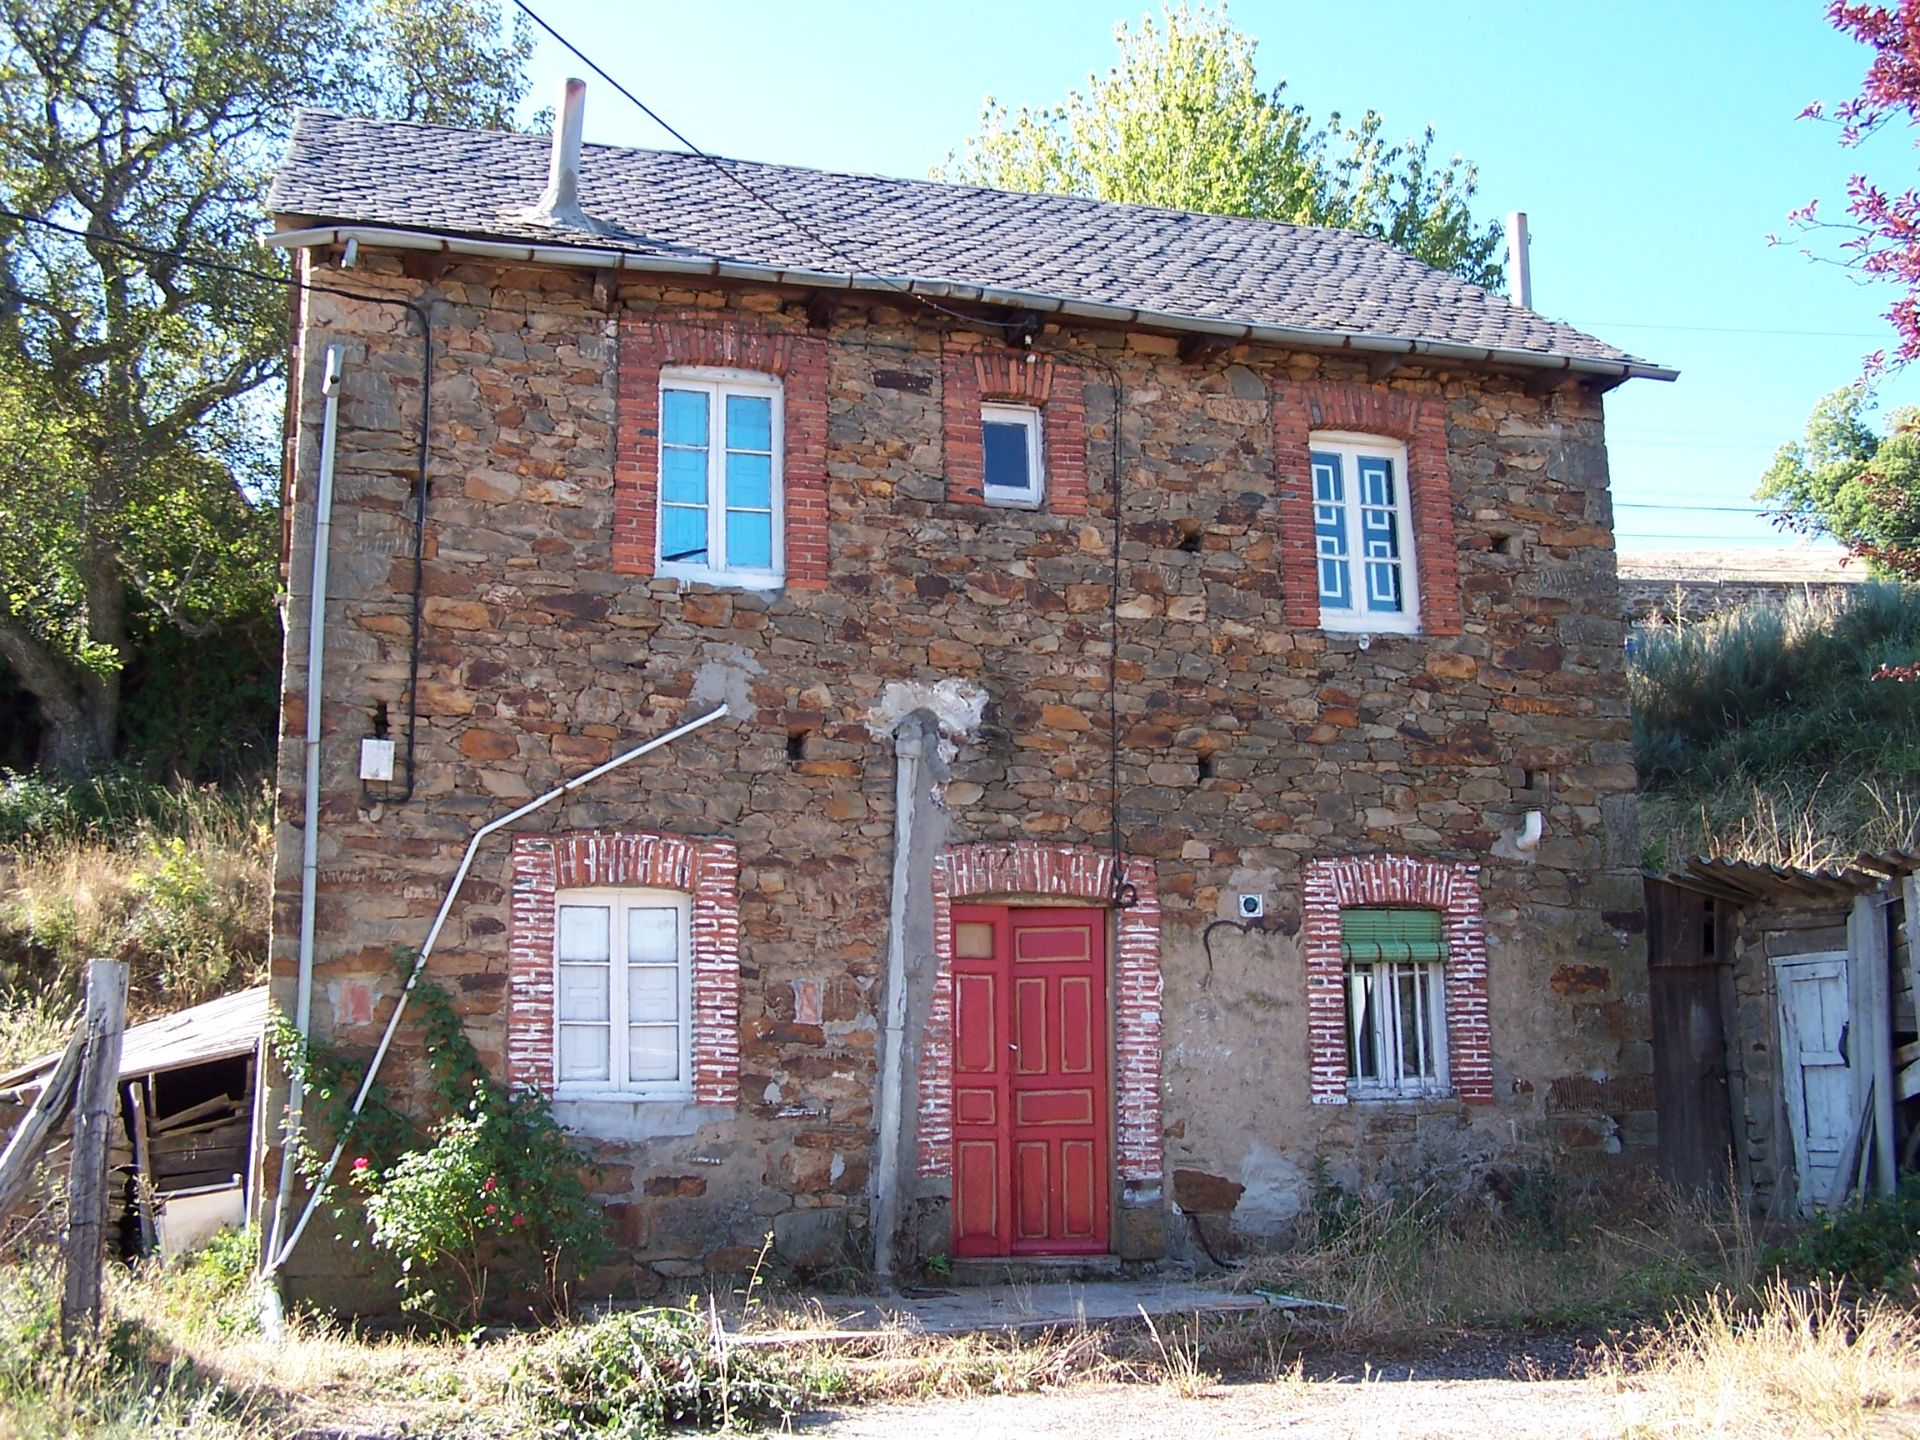 A LOVELY SOLID STONE BUILT 1927, 3 STOREY DETACHED HOUSE IN SPAIN 10% DEPOSIT REQUIRED WITHIN